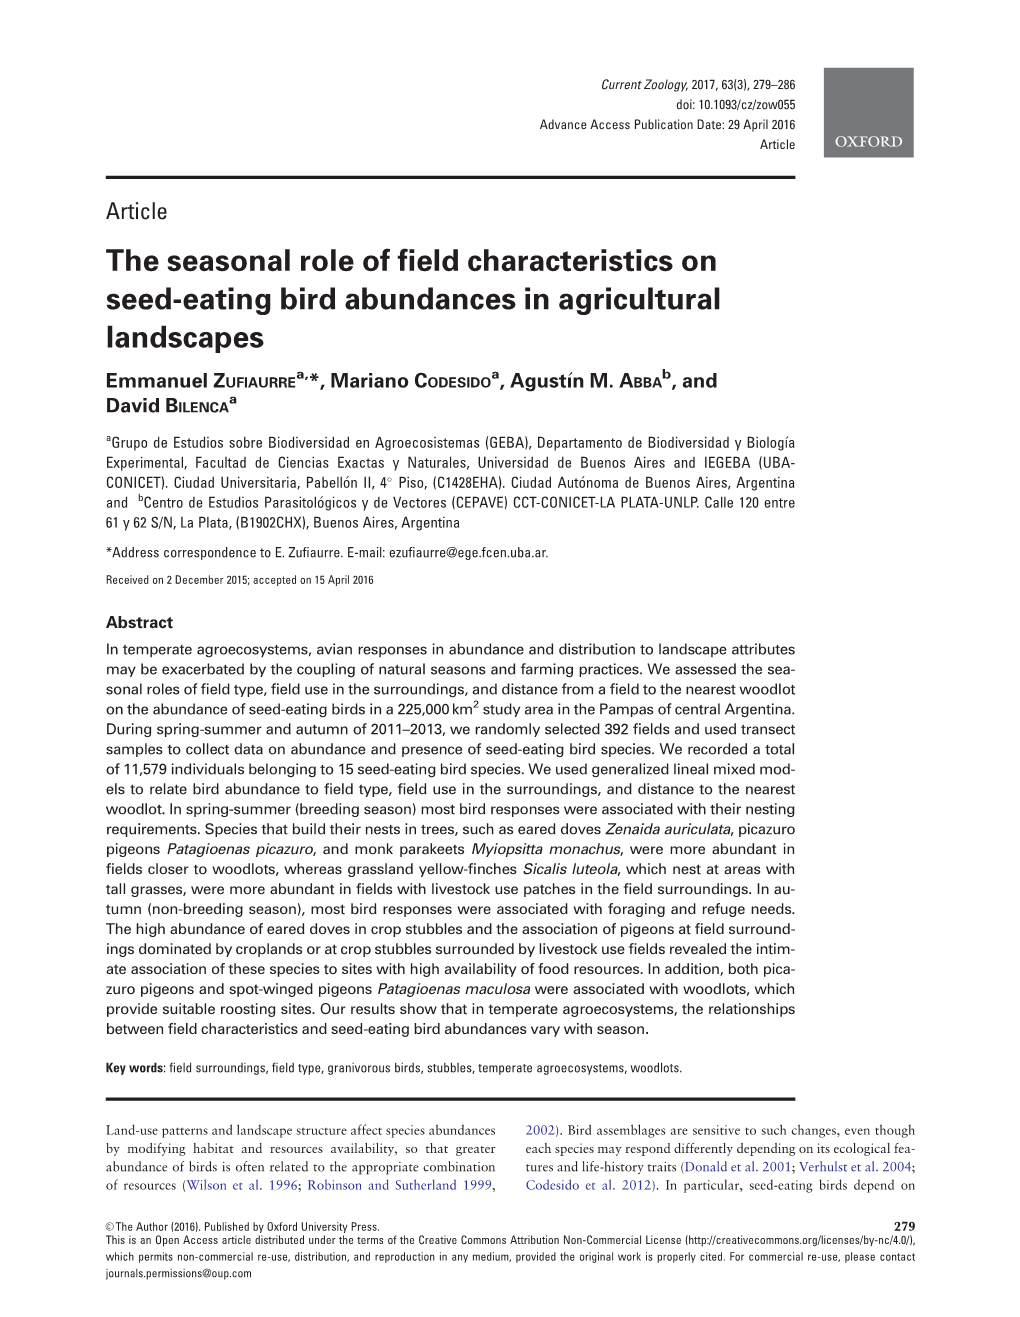 The Seasonal Role of Field Characteristics on Seed-Eating Bird Abundances in Agricultural Landscapes